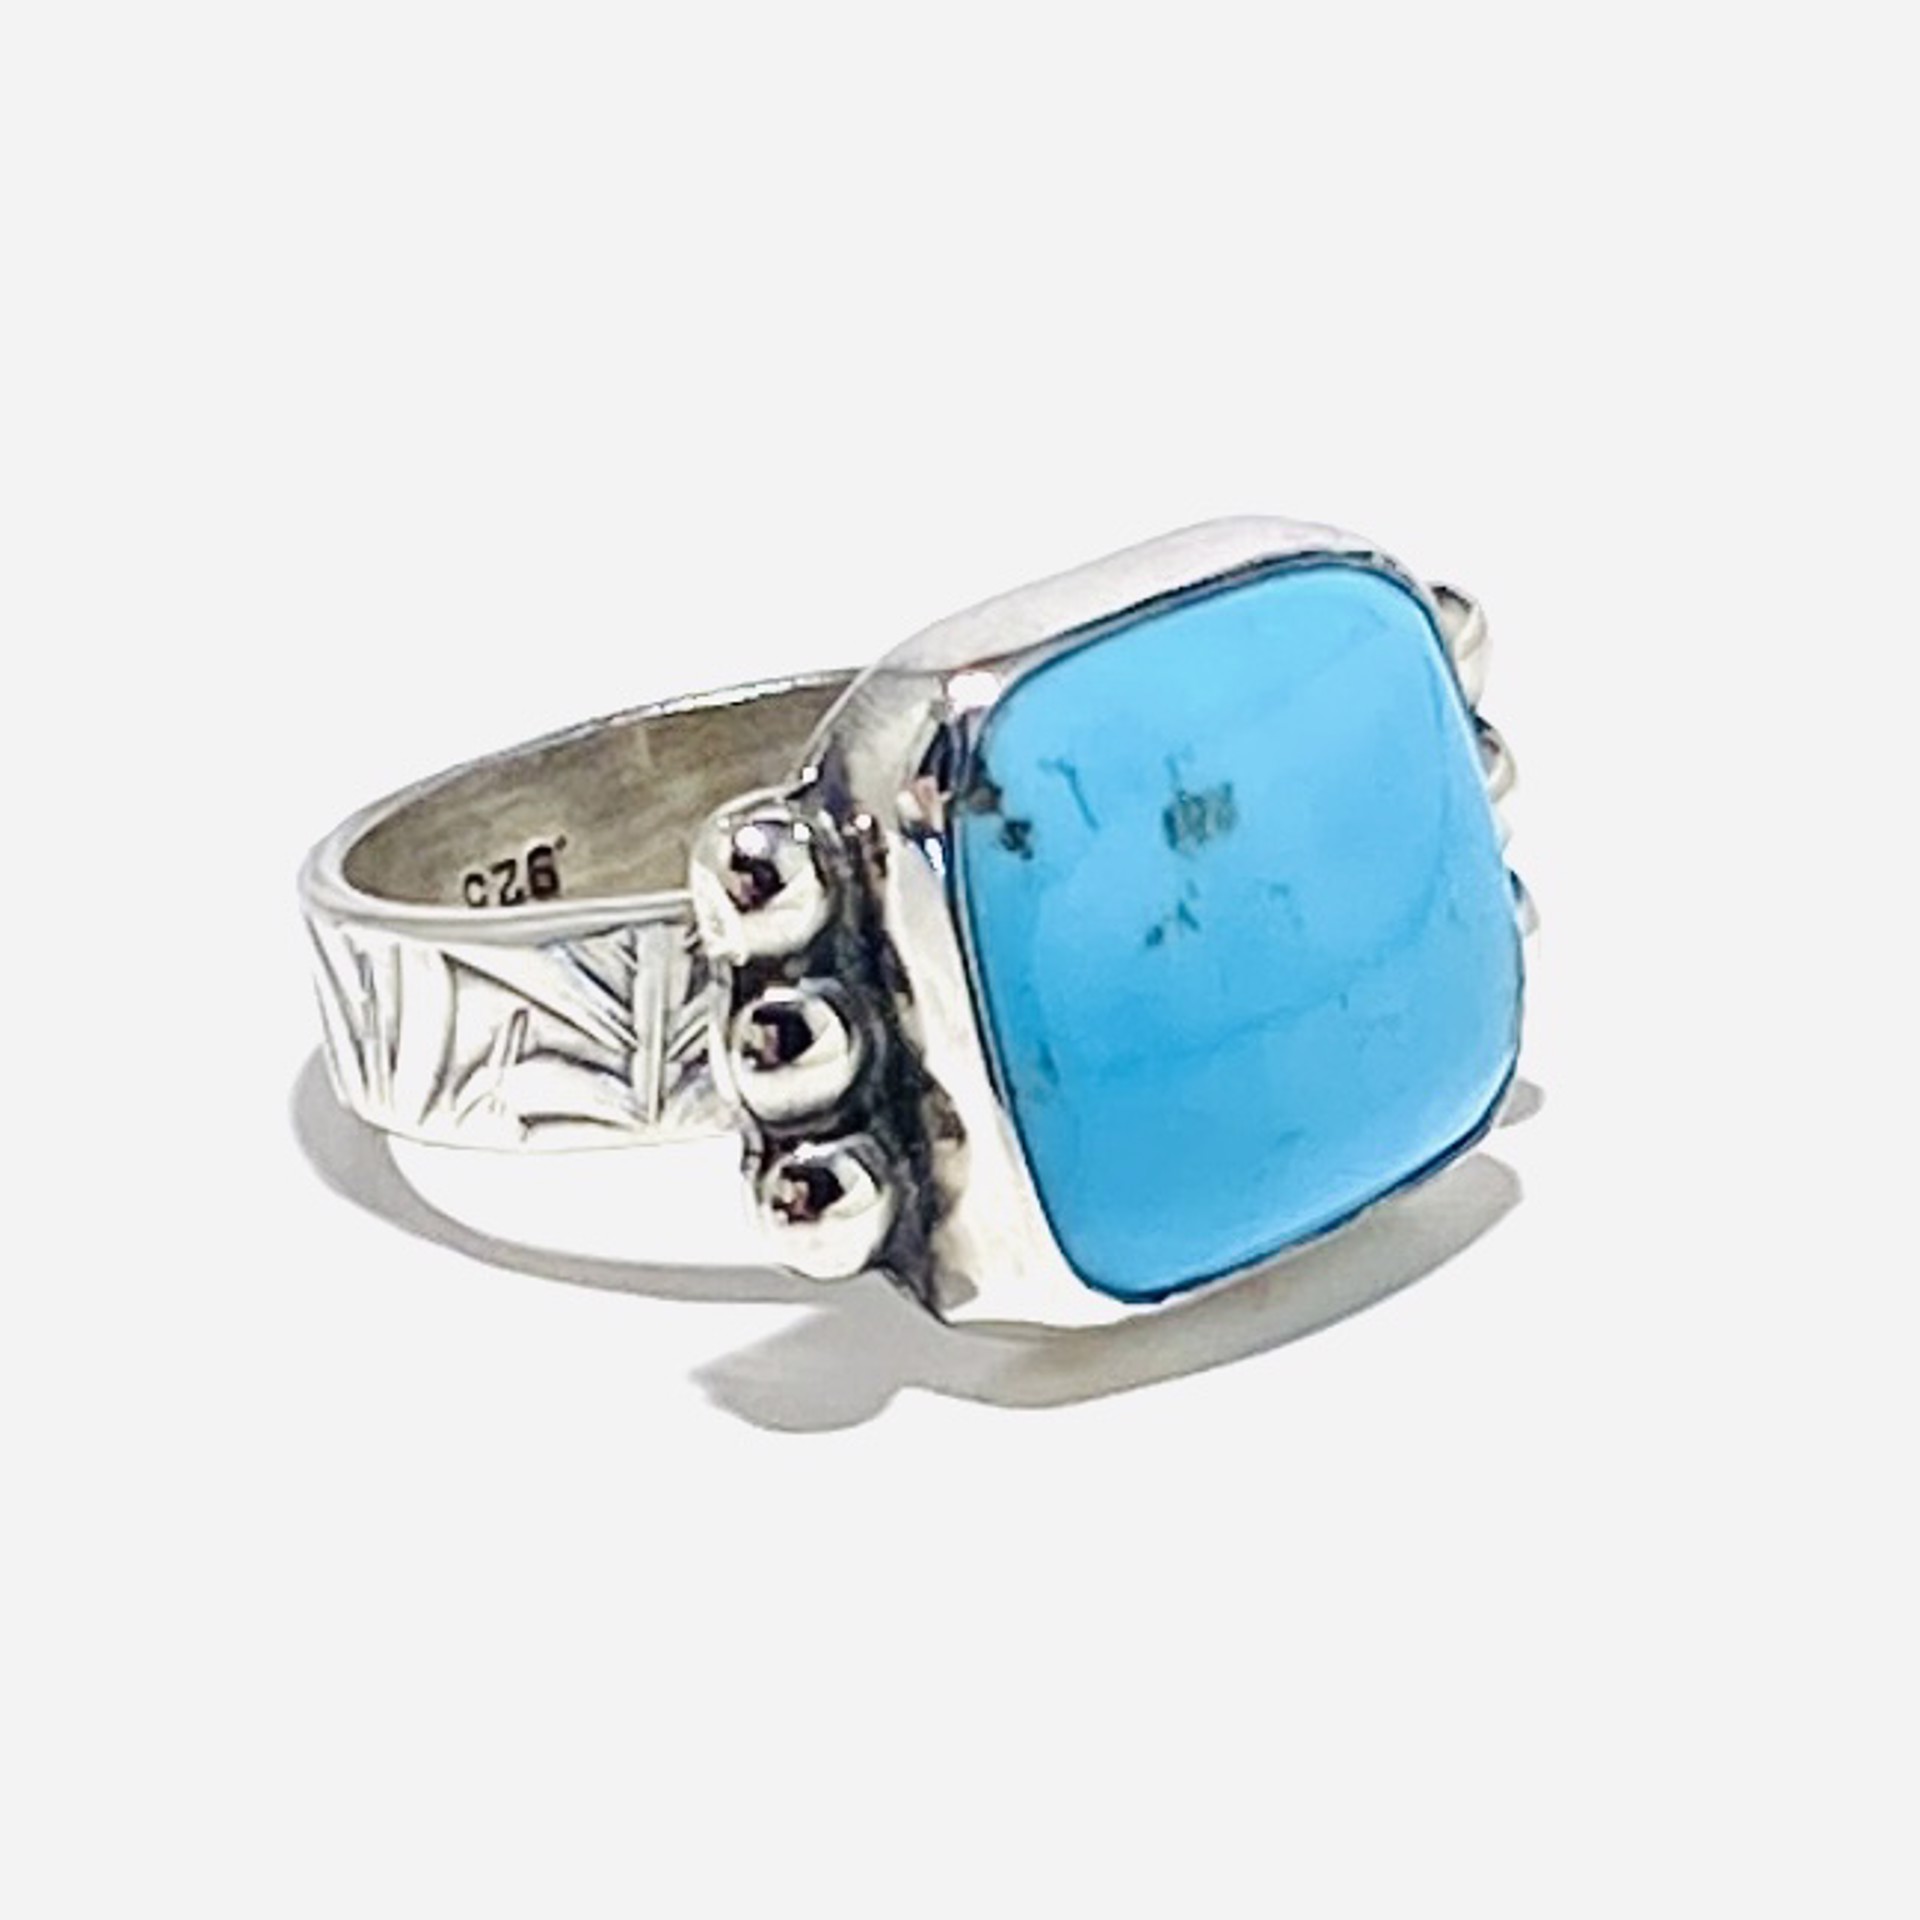 AB23-9 Square Campo Frio Turquoise Inlay Six Bead Accent Ring sz8.5 by Anne Bivens